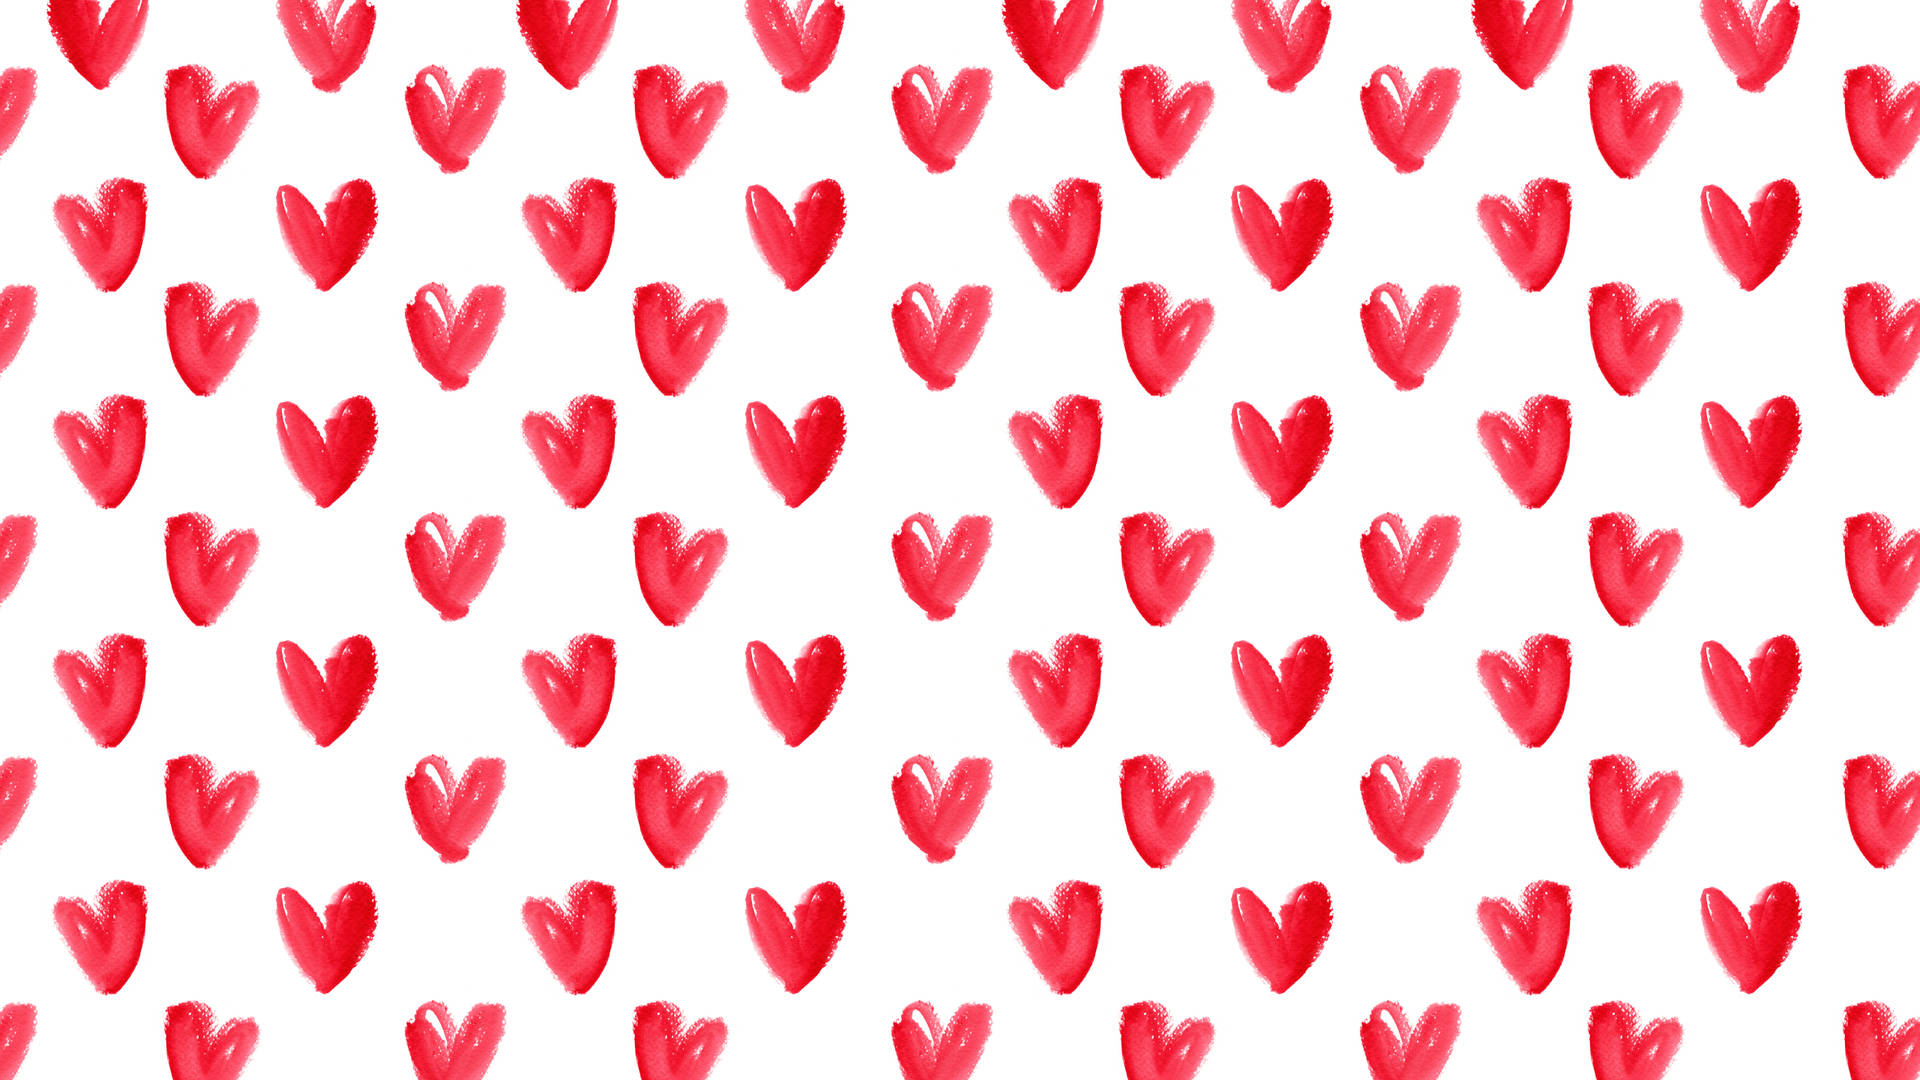 Celebrate Love in February with hand drawn hearts Wallpaper